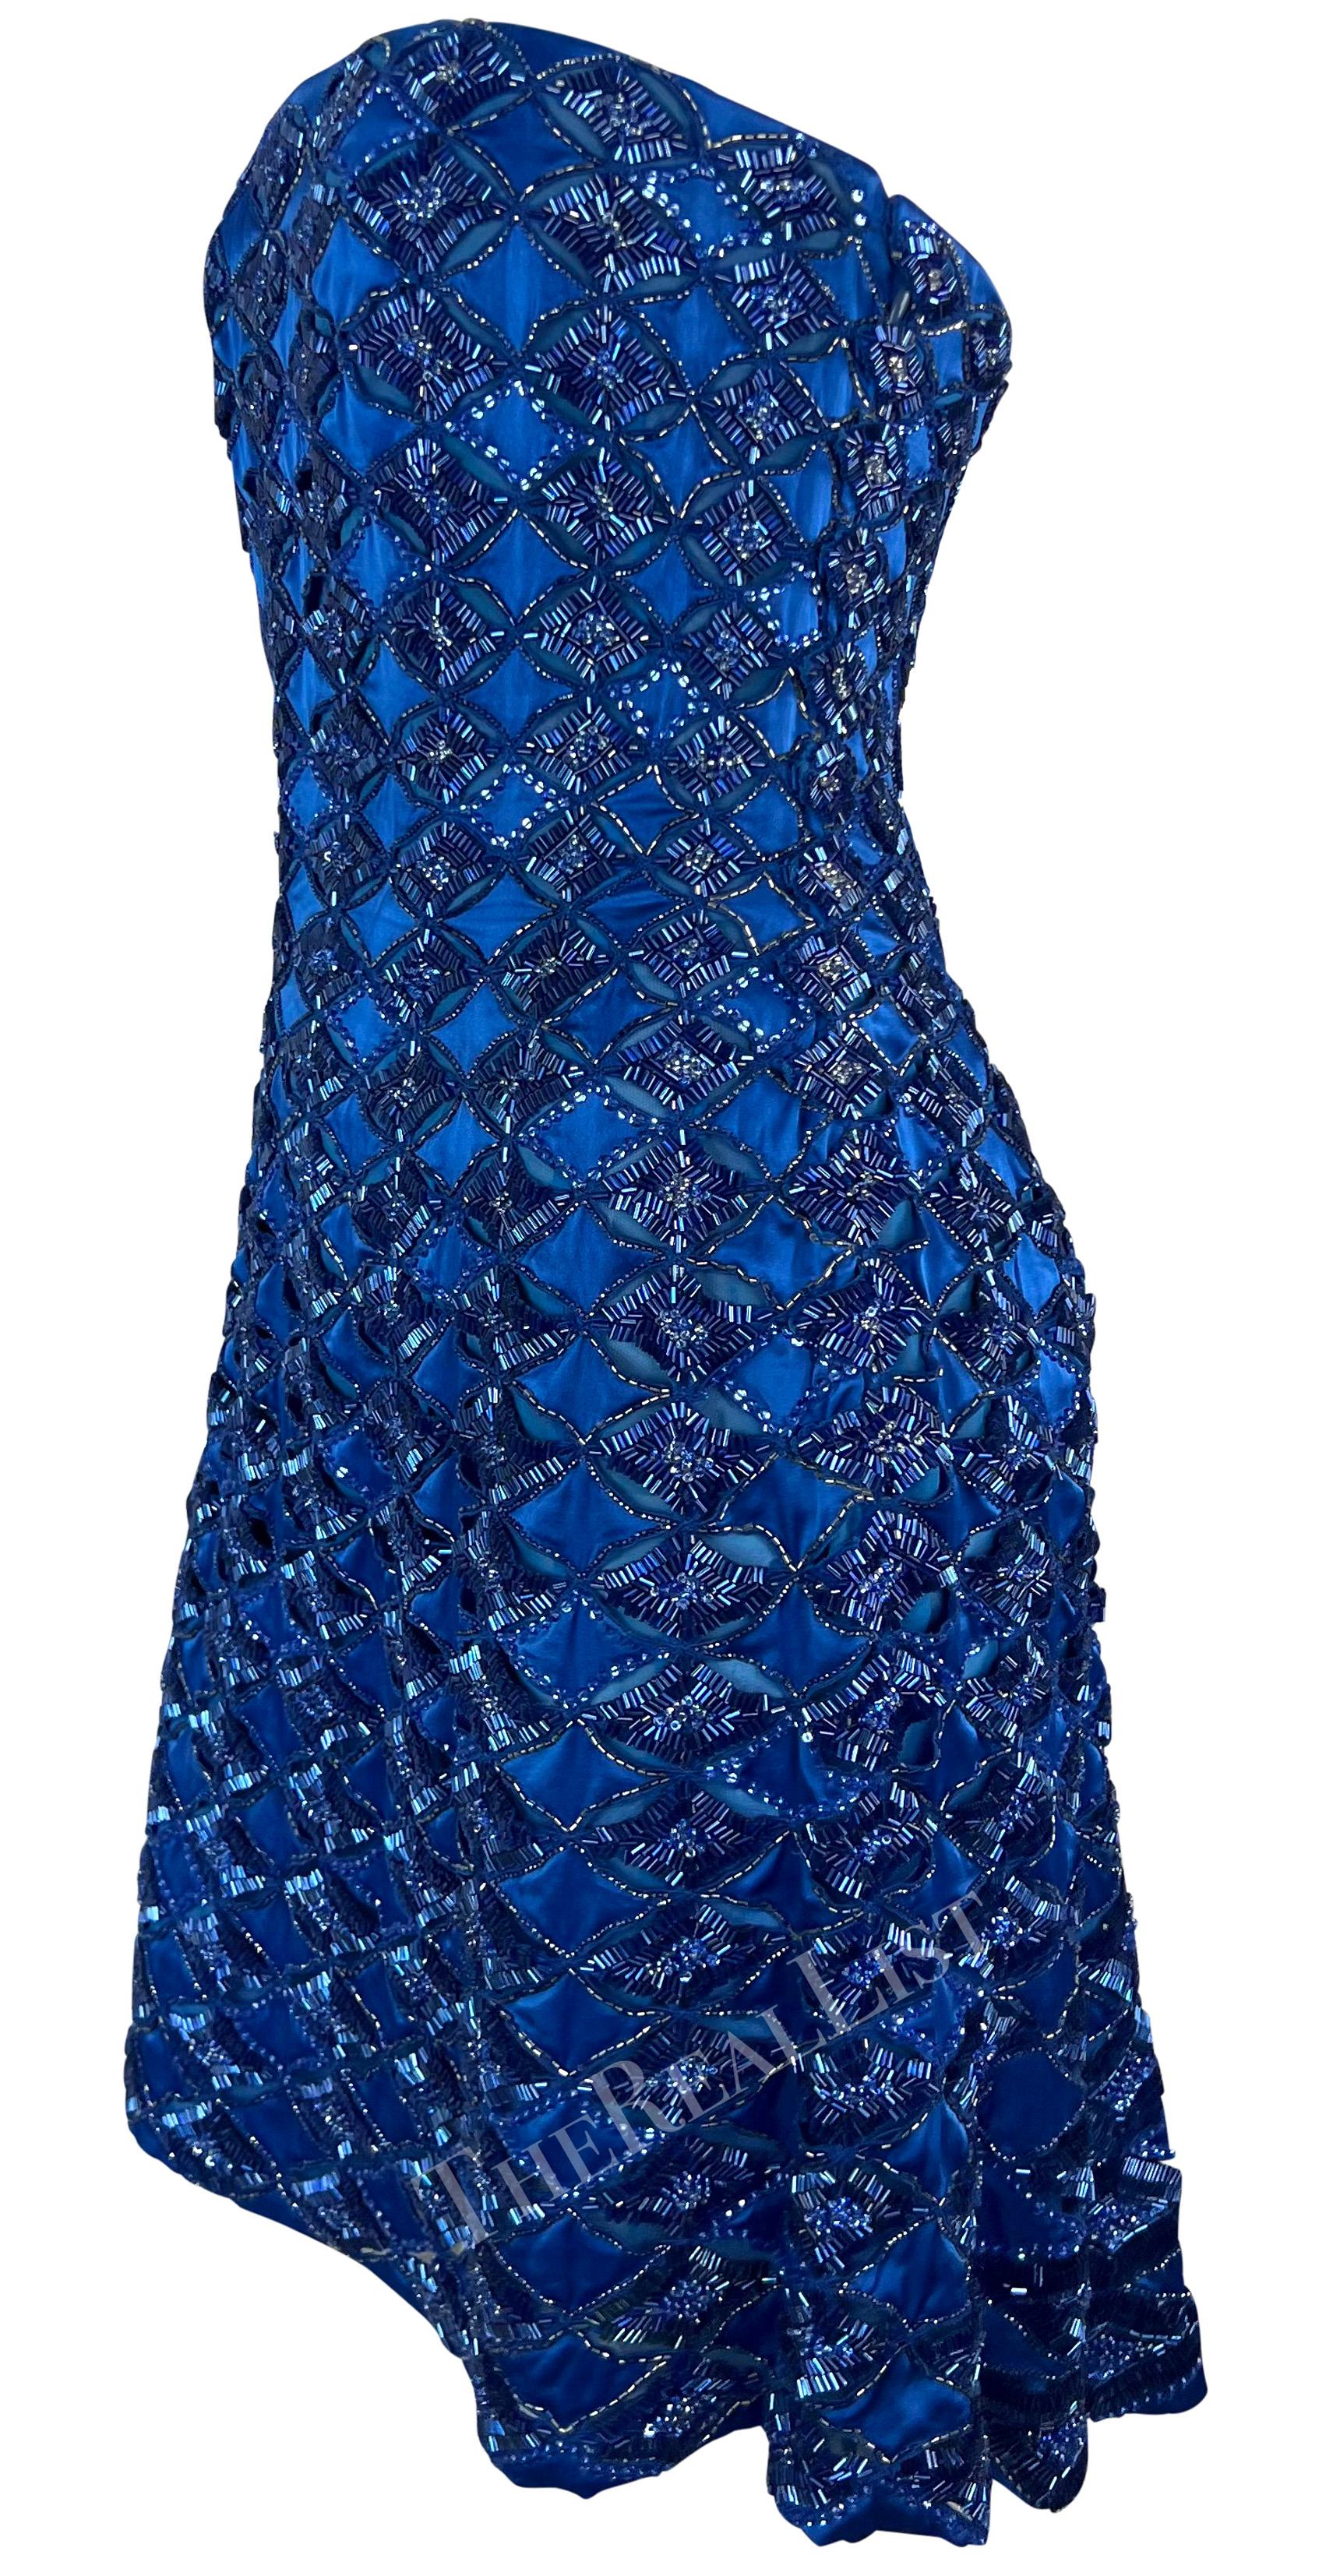 S/S 2001 Atelier Versace by Donatella Runway Blue Beaded Strapless Mini Dress For Sale 3